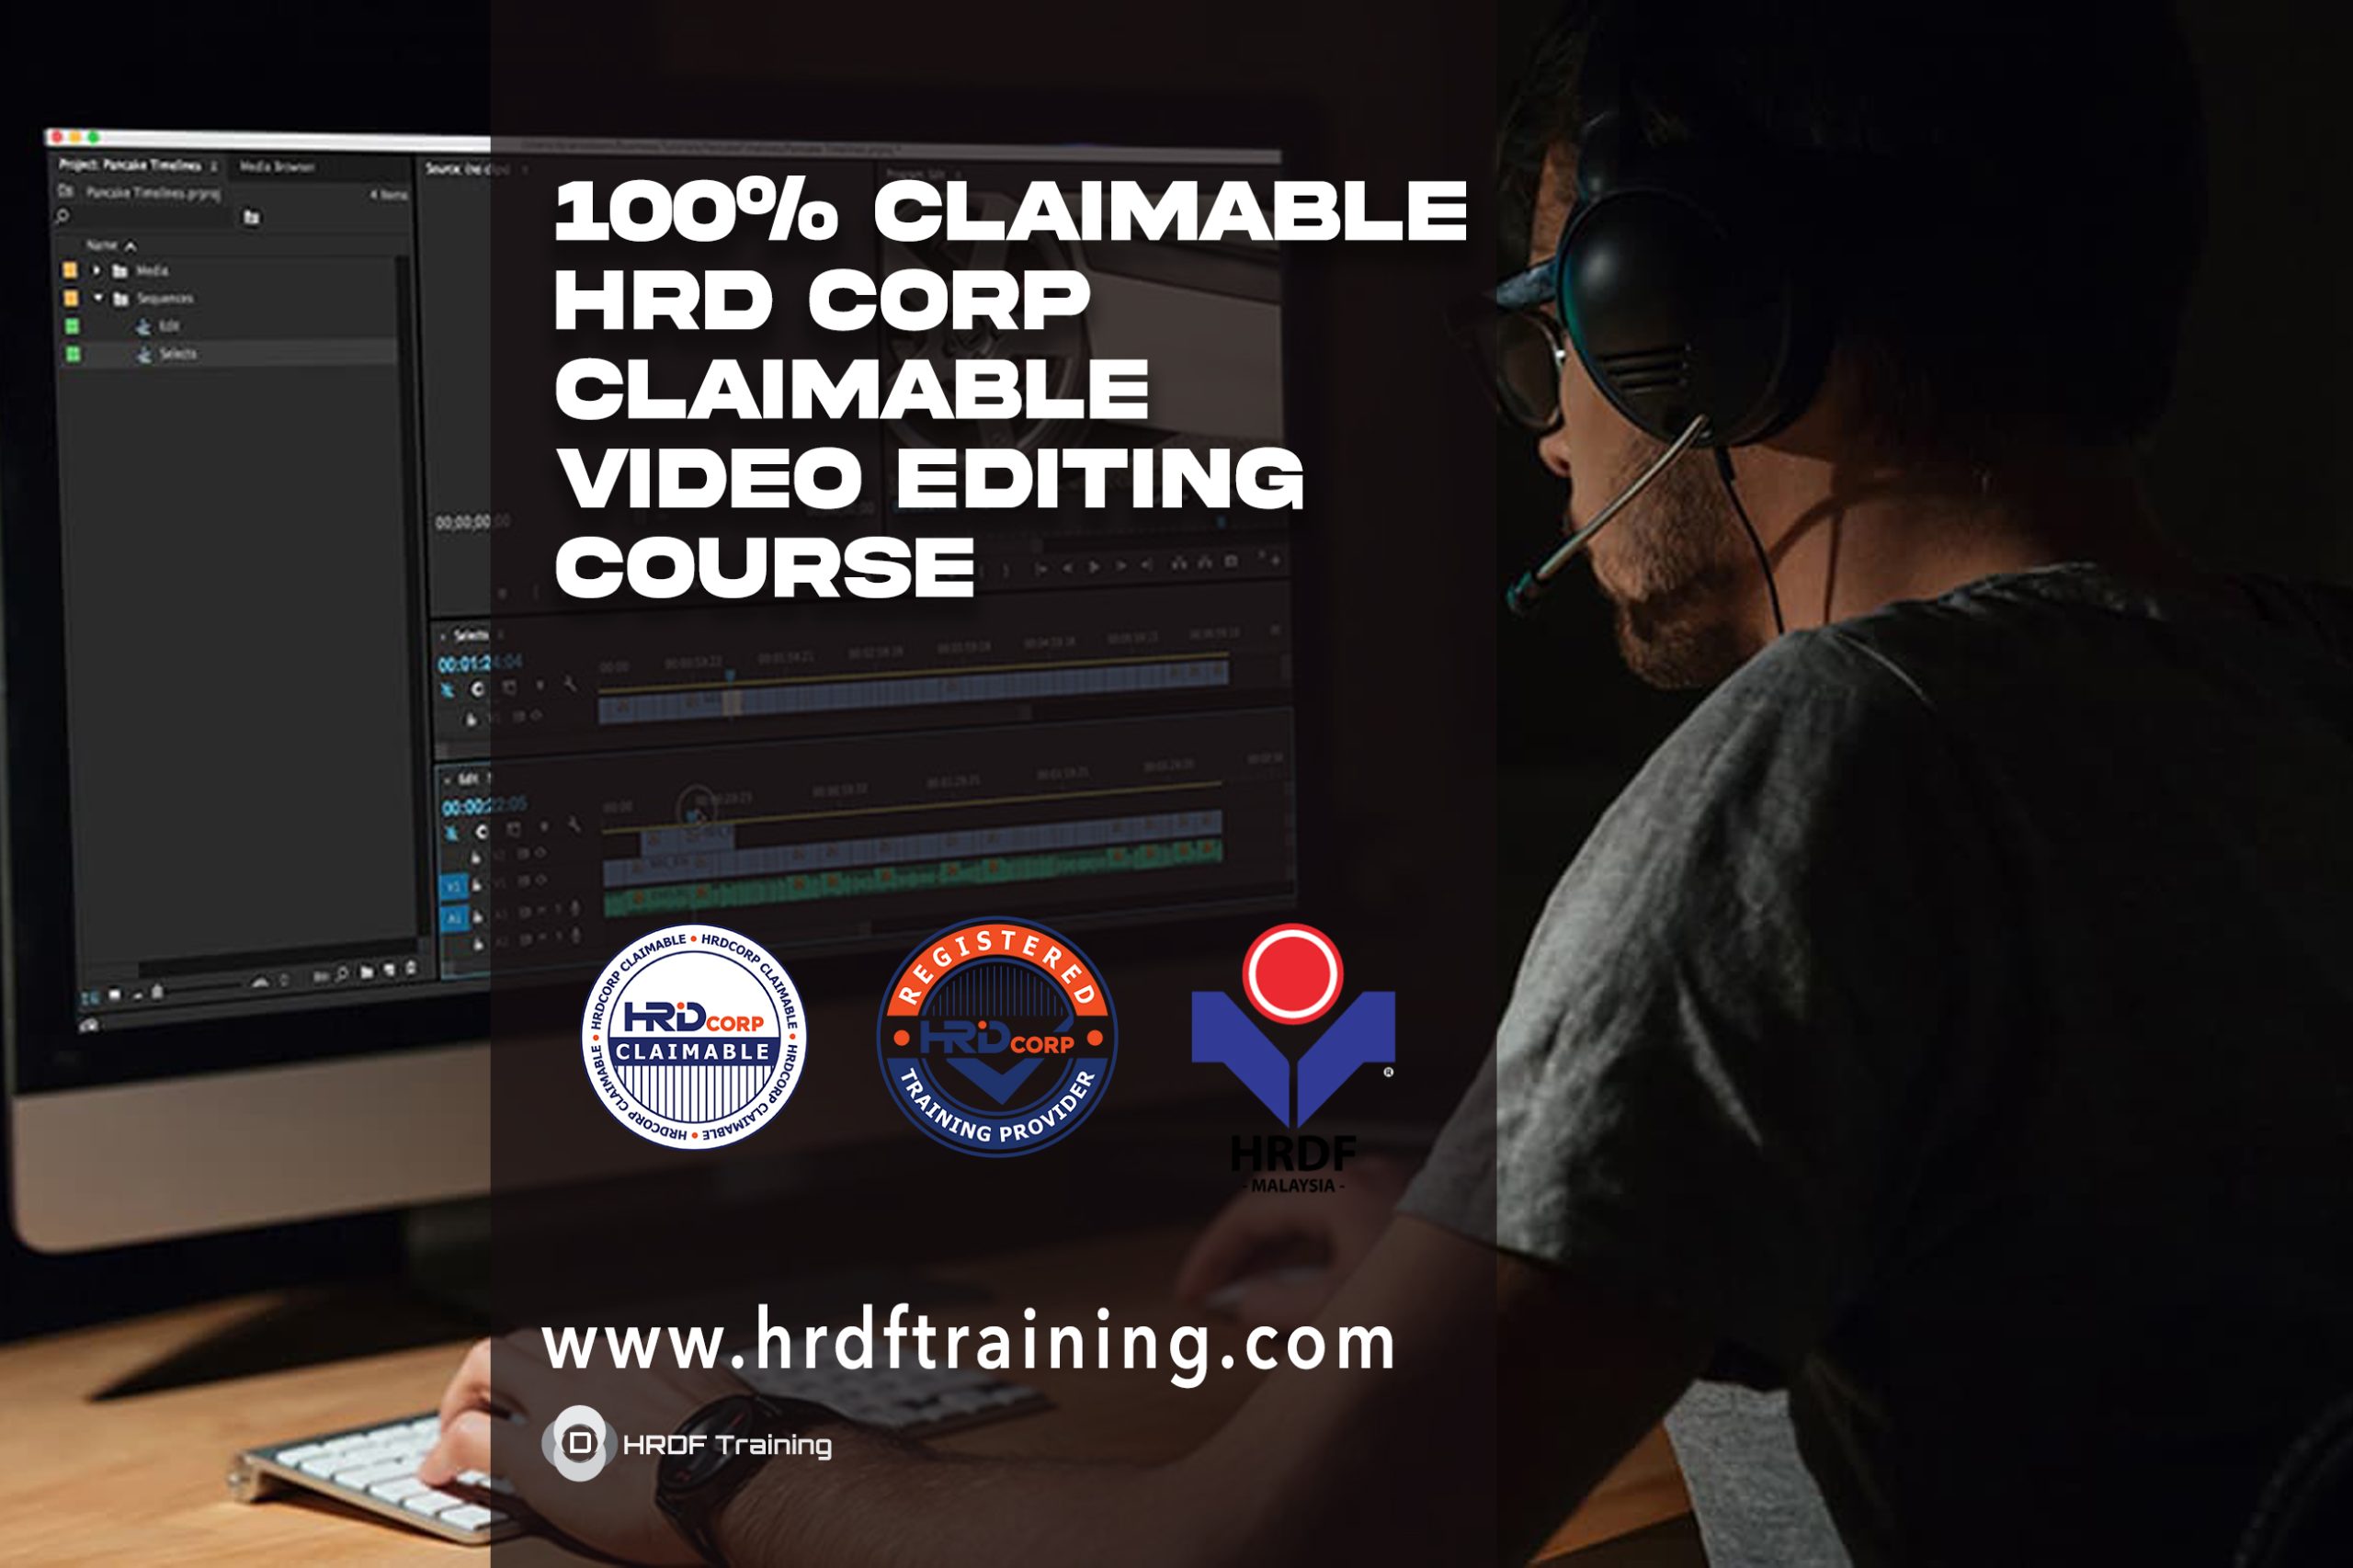 HRDF HRD Corp Claimable Video Editing Training Course Malaysia - April 2023